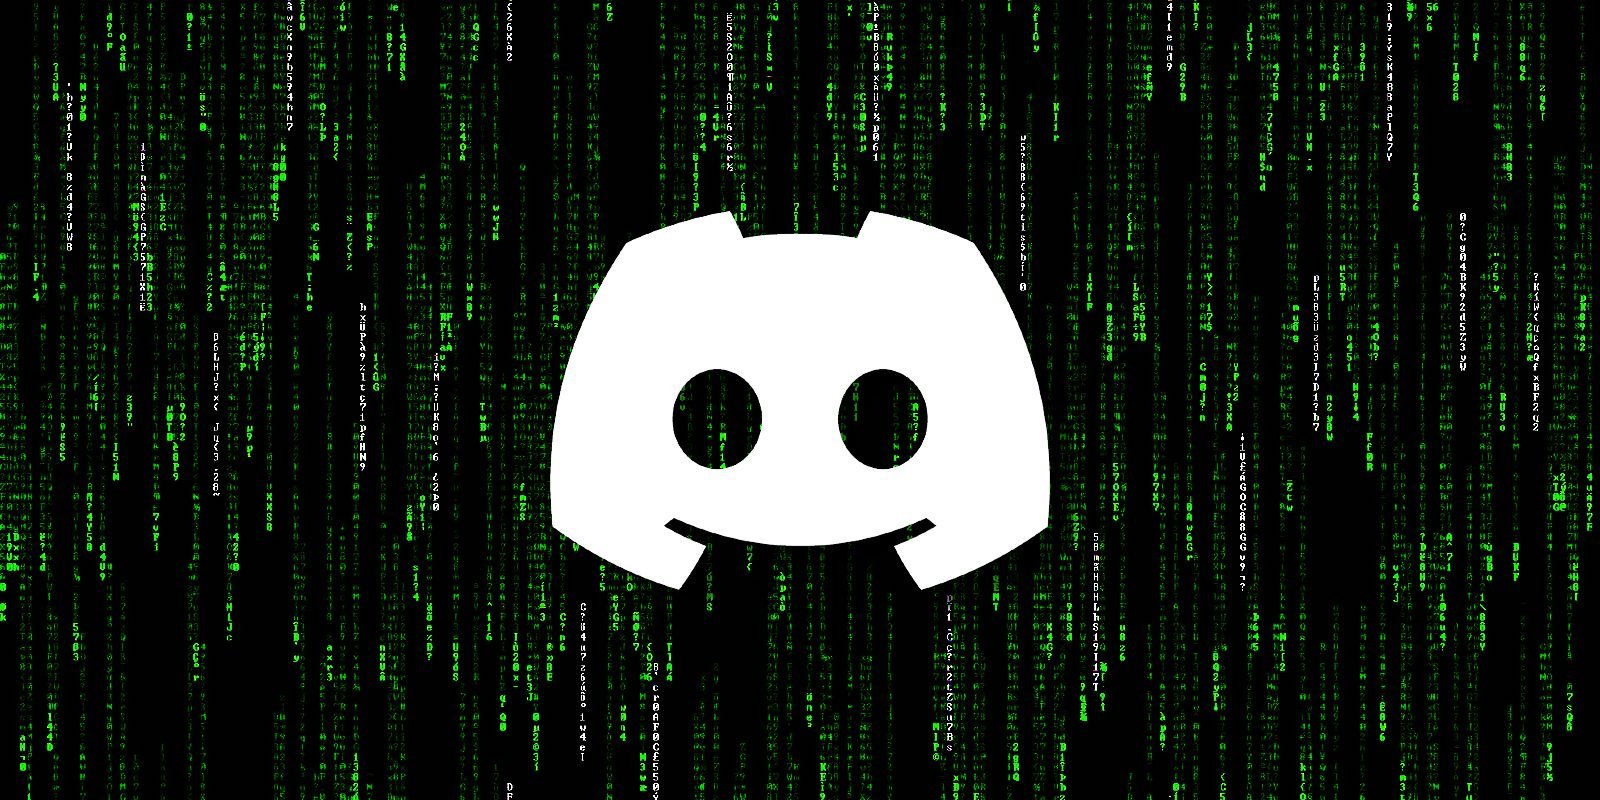 Discord discloses data breach after support agent got hacked